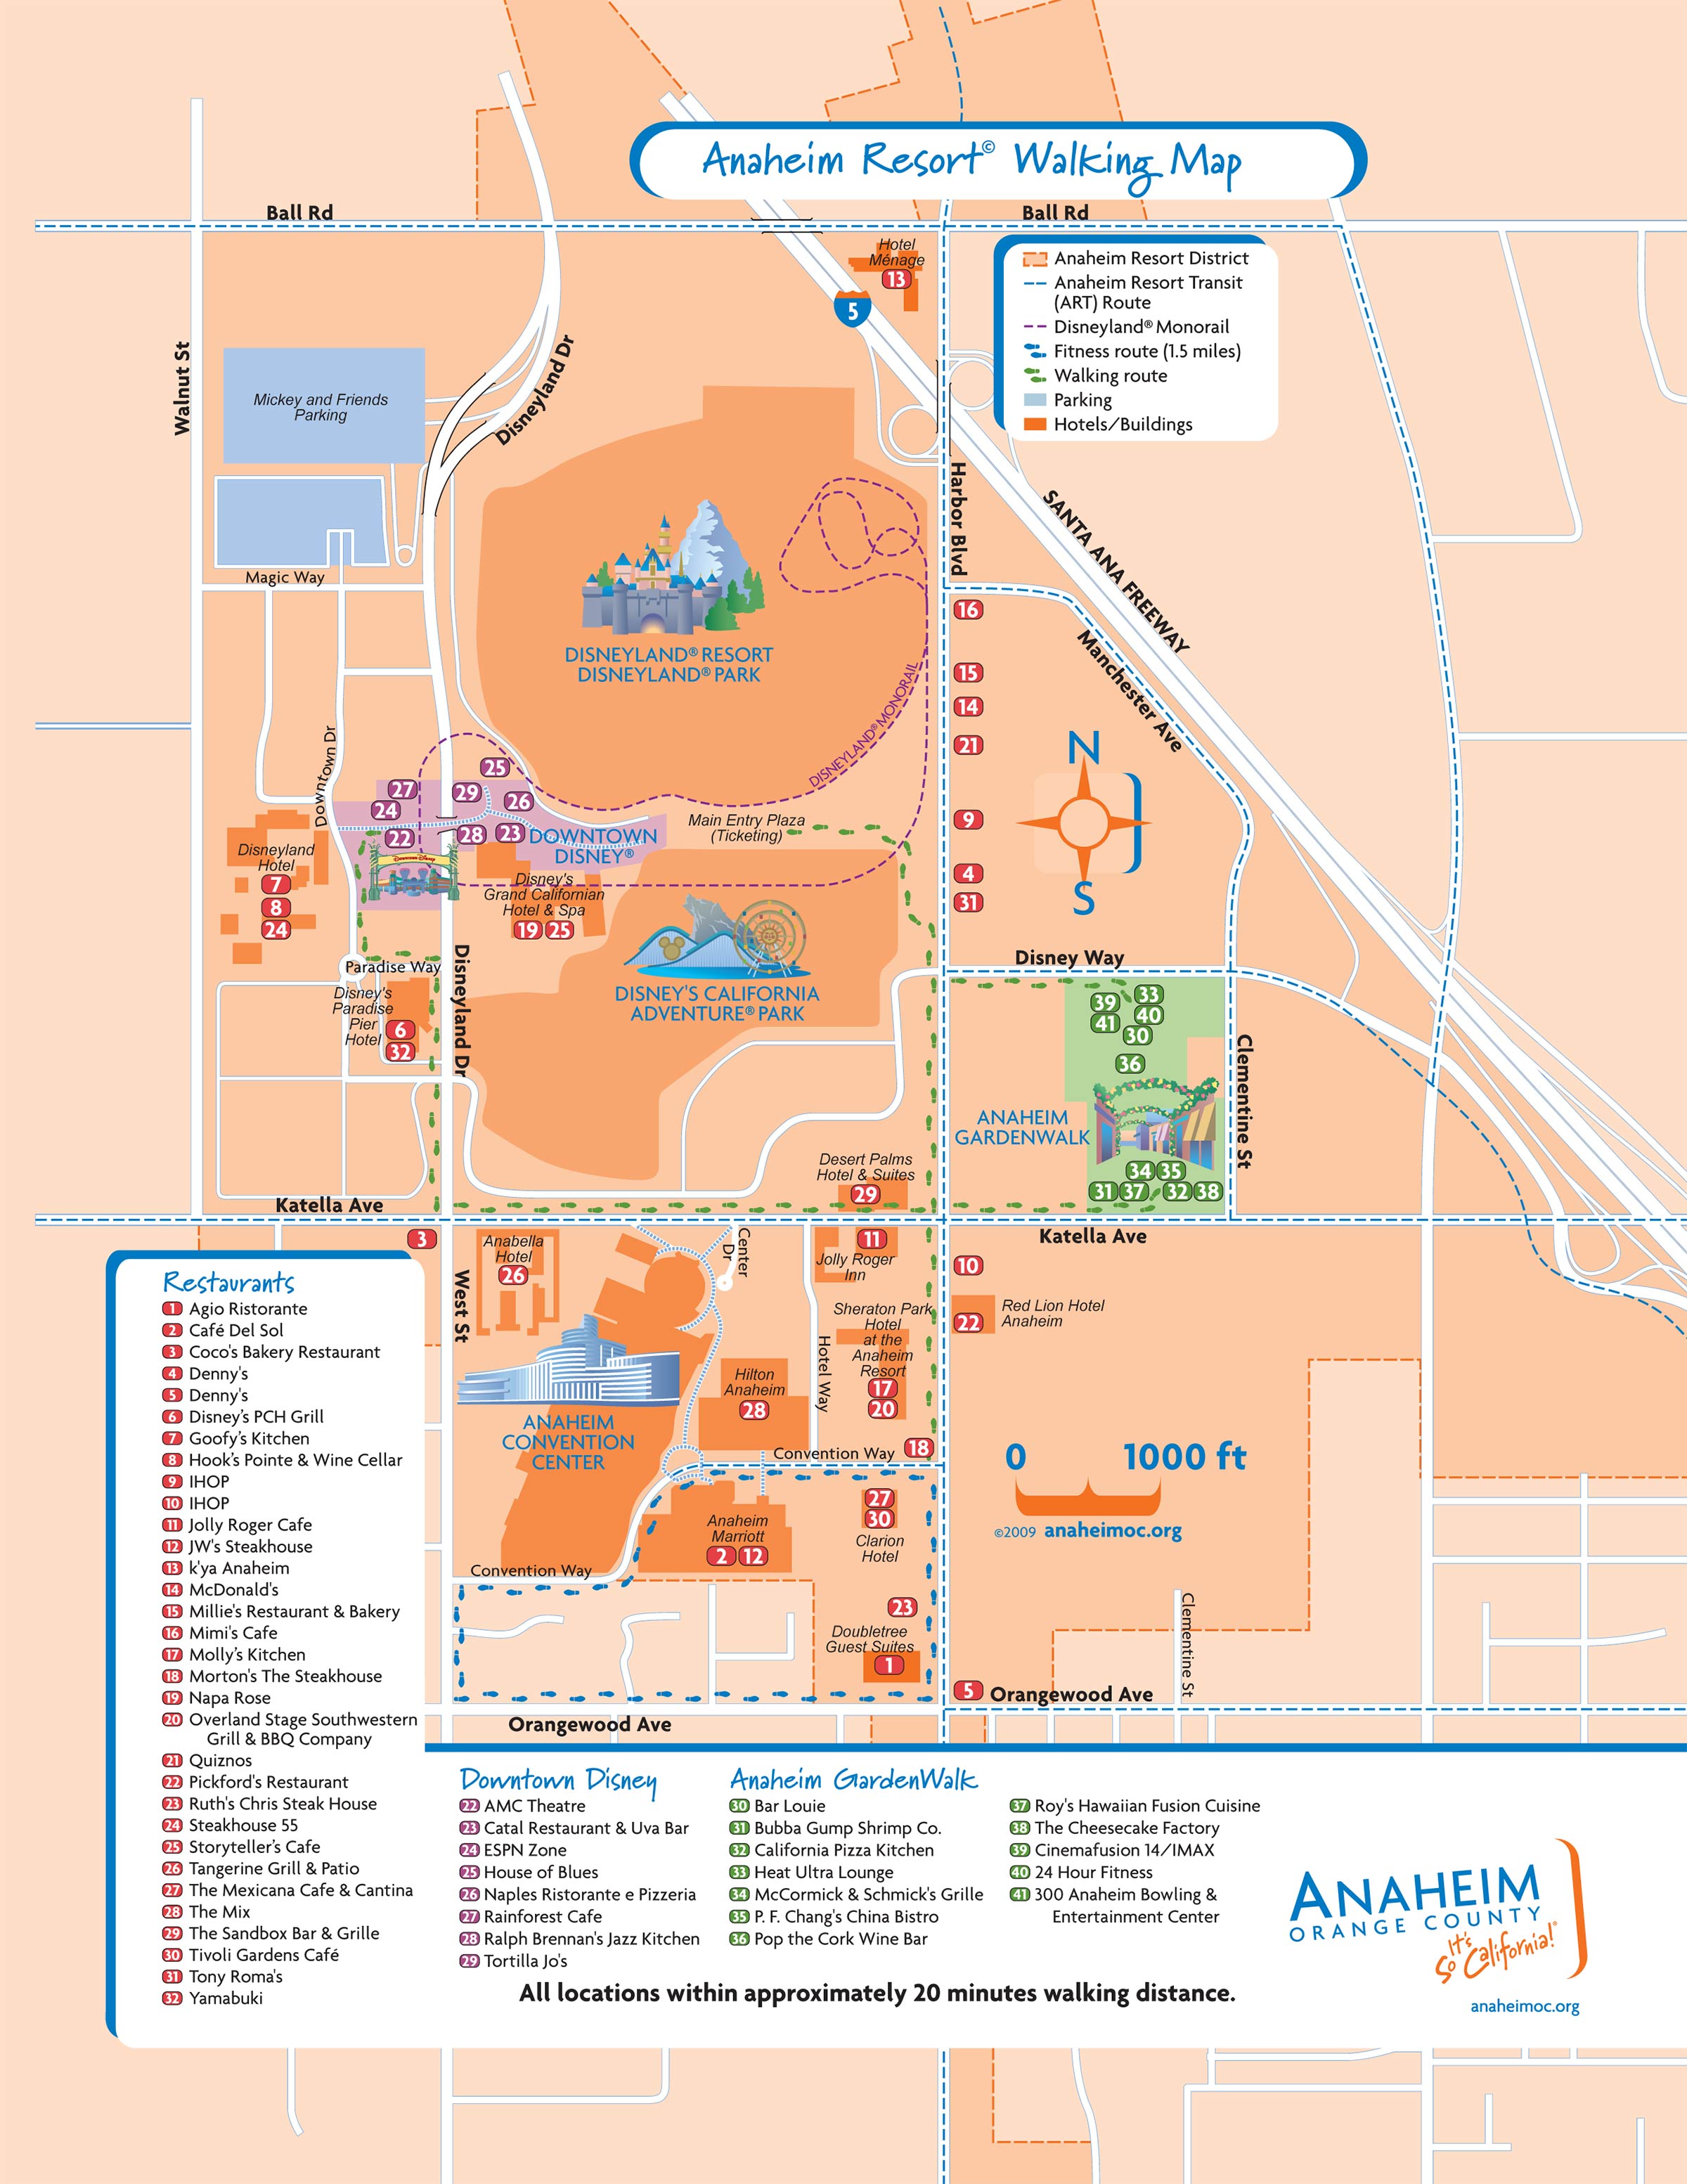 Anaheim Convention Center Map Of Area